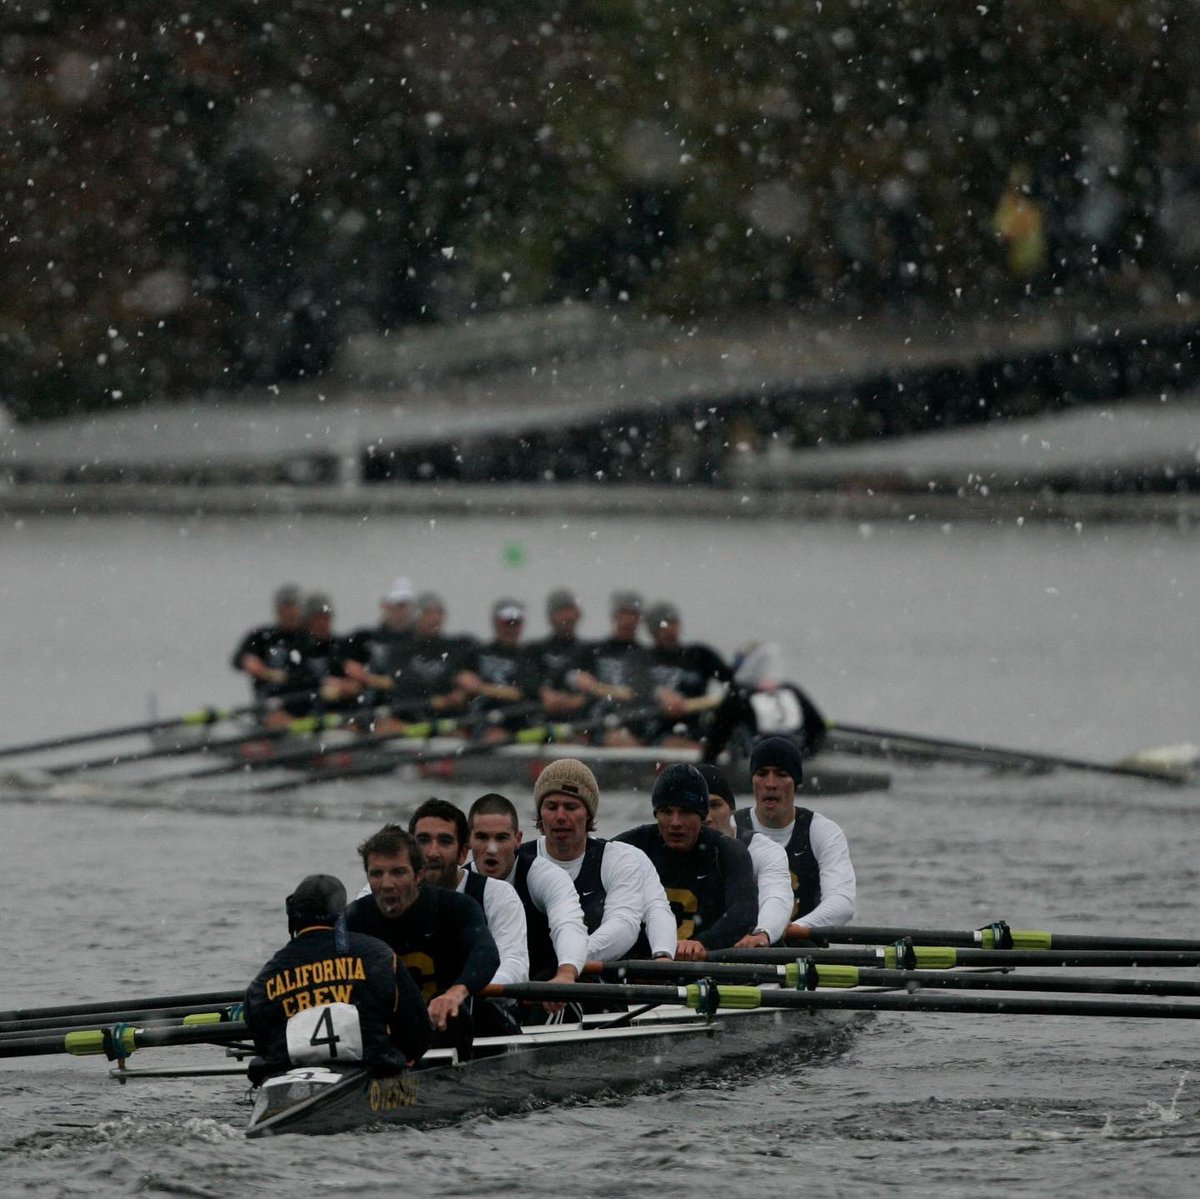 As we gear up for a winter storm this weekend in Boston, who remembers this snowy Regatta weekend in 2009?